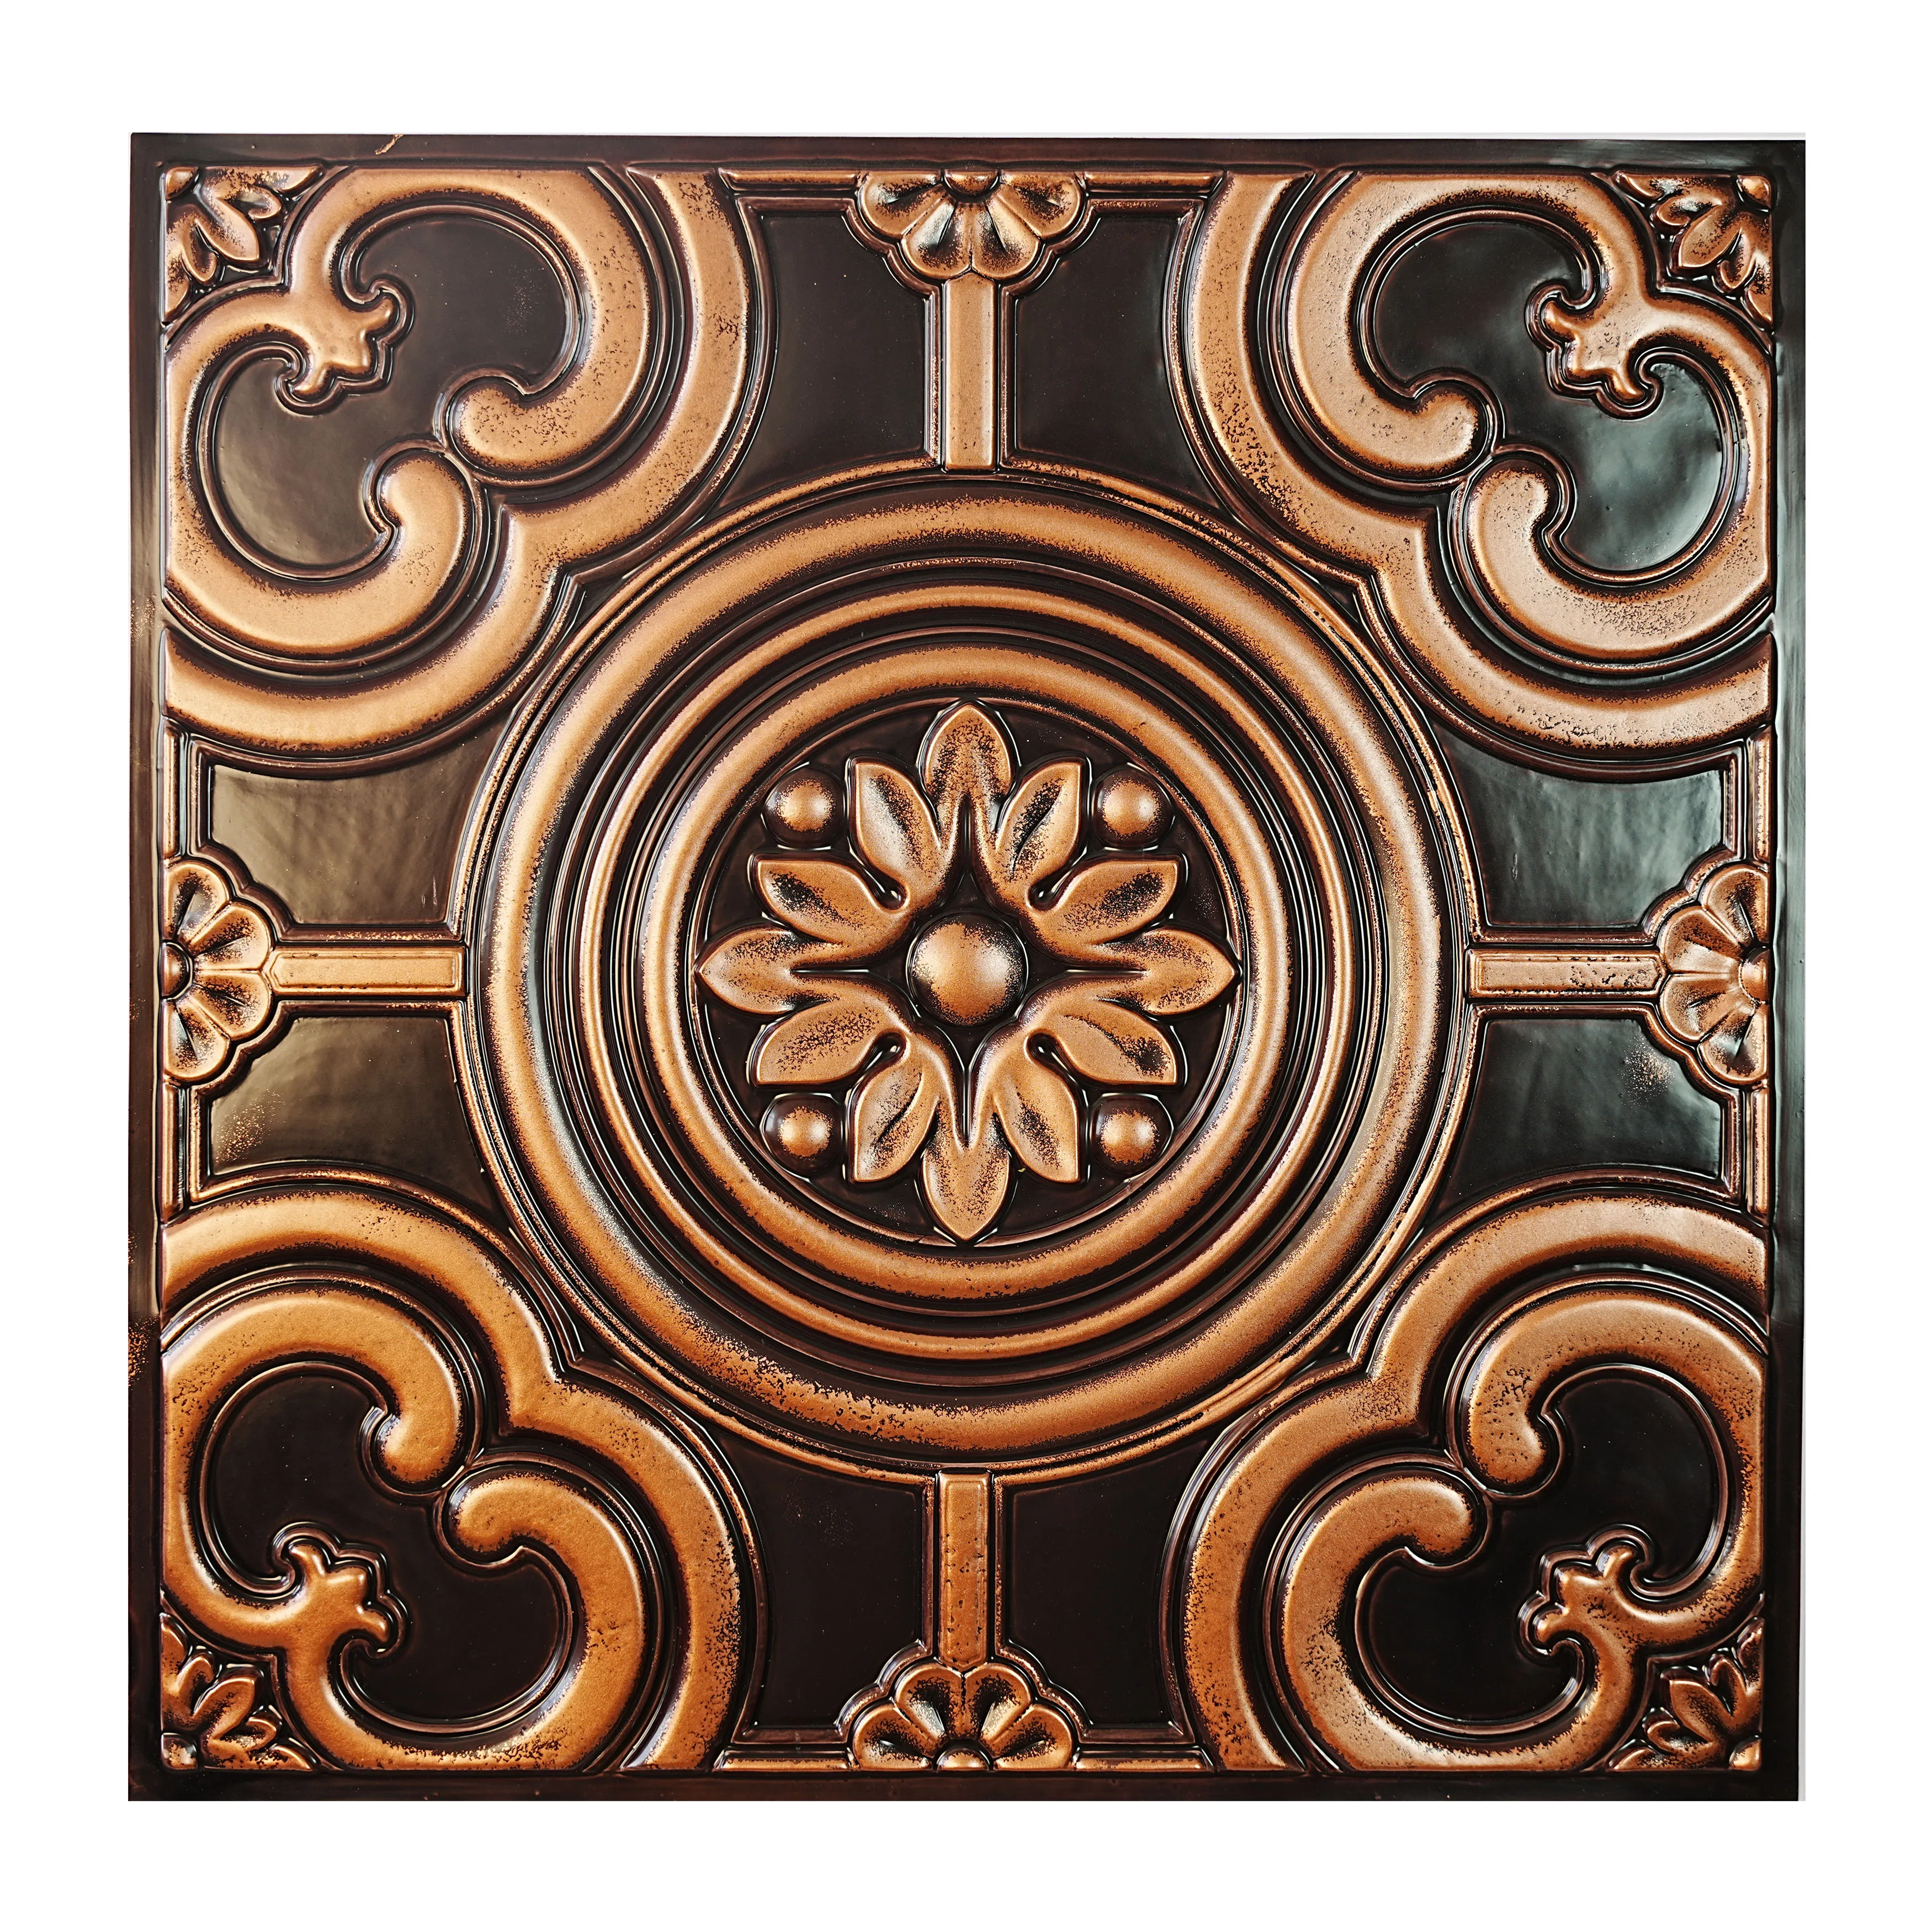 3D Embossed Ceiling Tile Faux Tin Painting Panel Interior Decorative Suspended Board for Cafe Club Salon PL50 Traditional copper